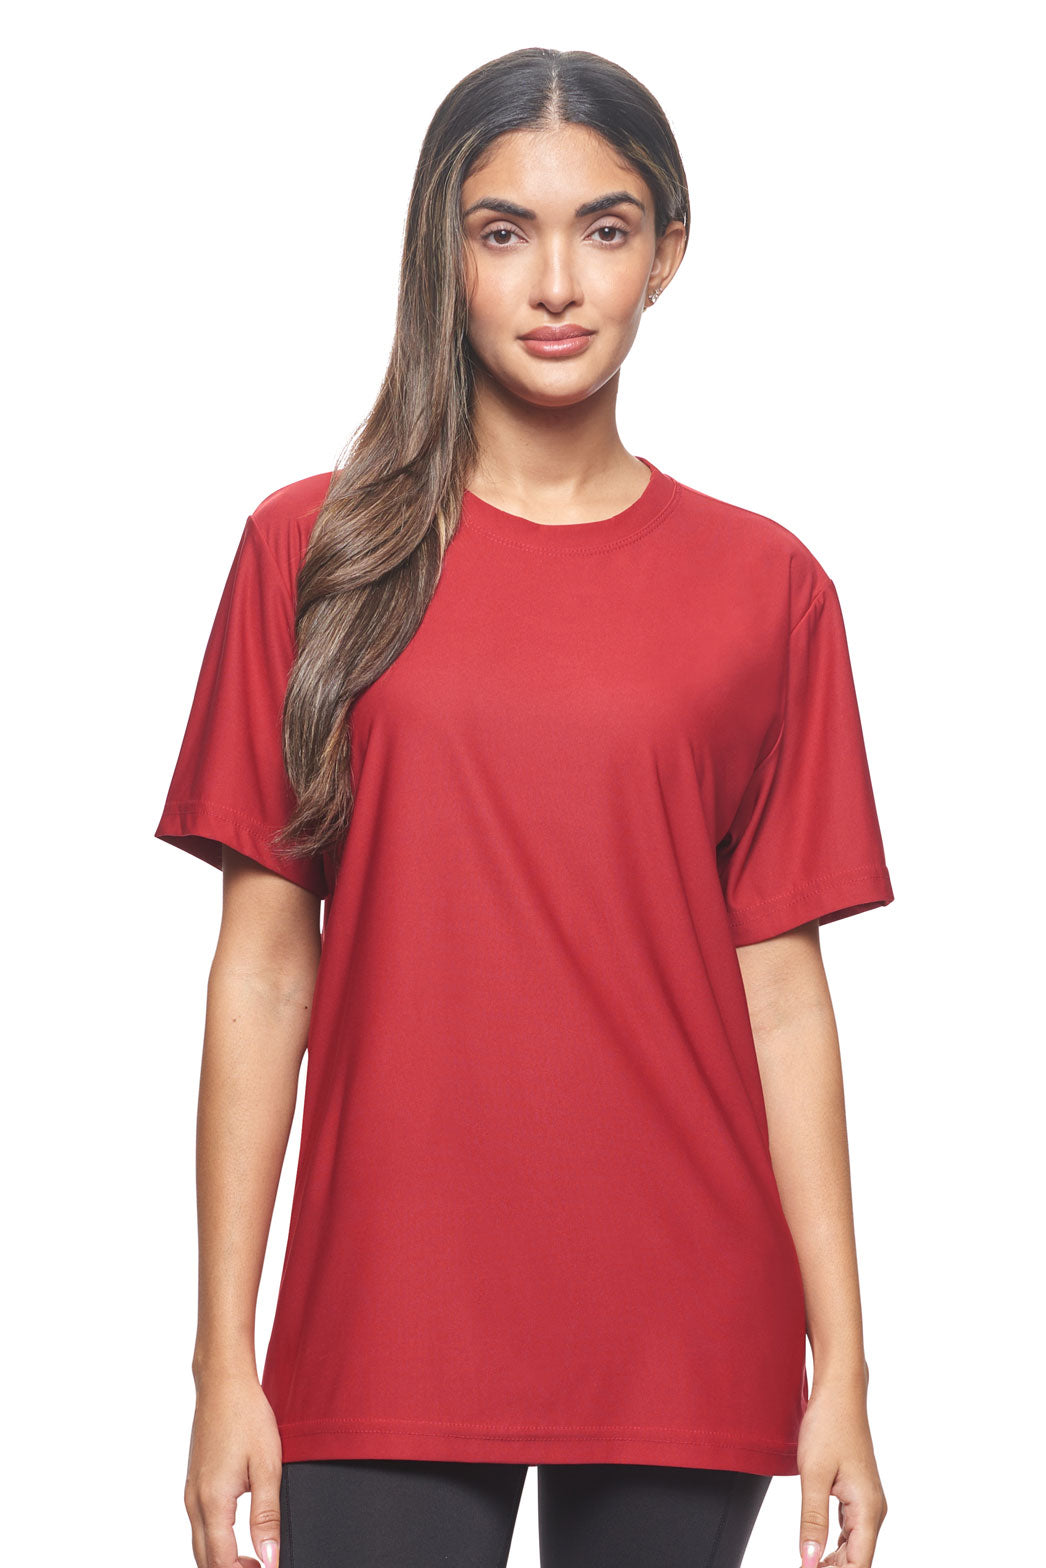 Expert Brand Apparel Made in USA Recycled Polyester Repreve Performance Tee Unisex RP801U Poinsettia image 4#color_poinsettia